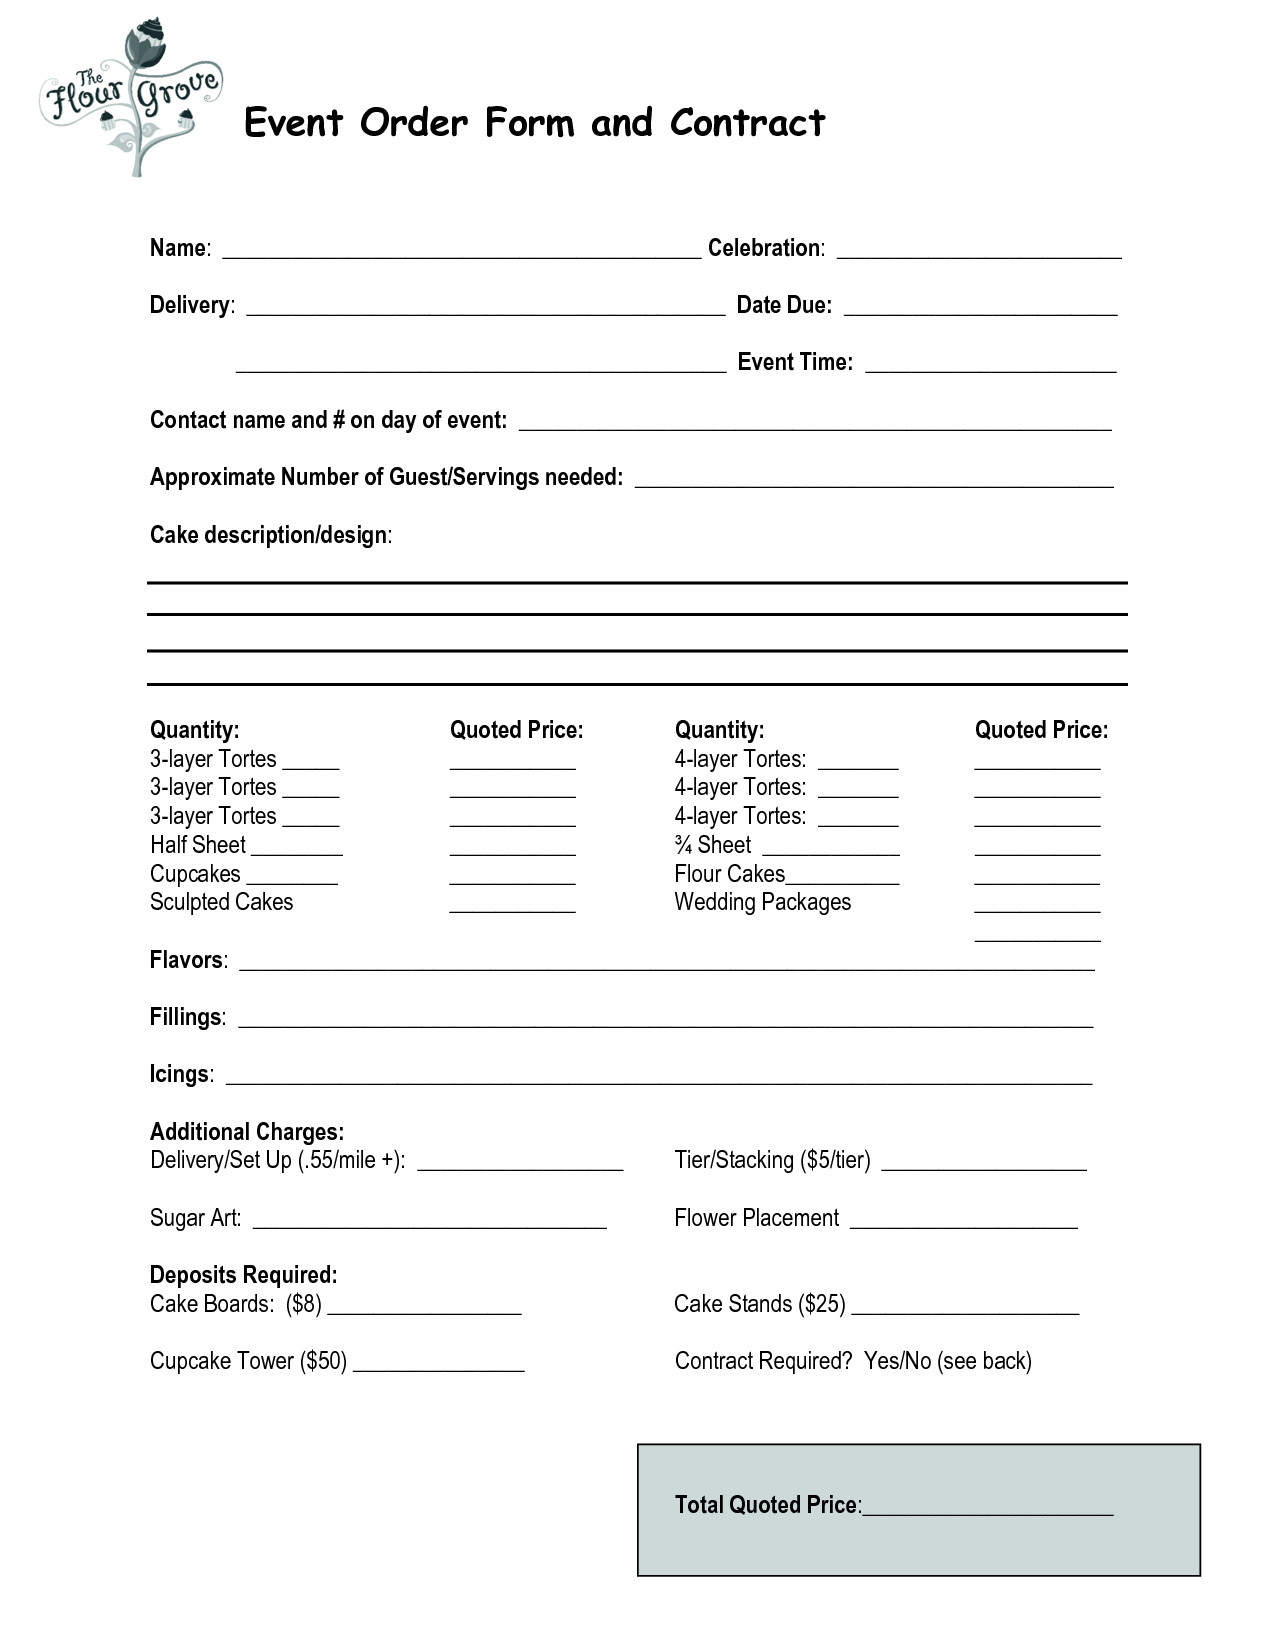 cake order contract Event Order Form and Contract